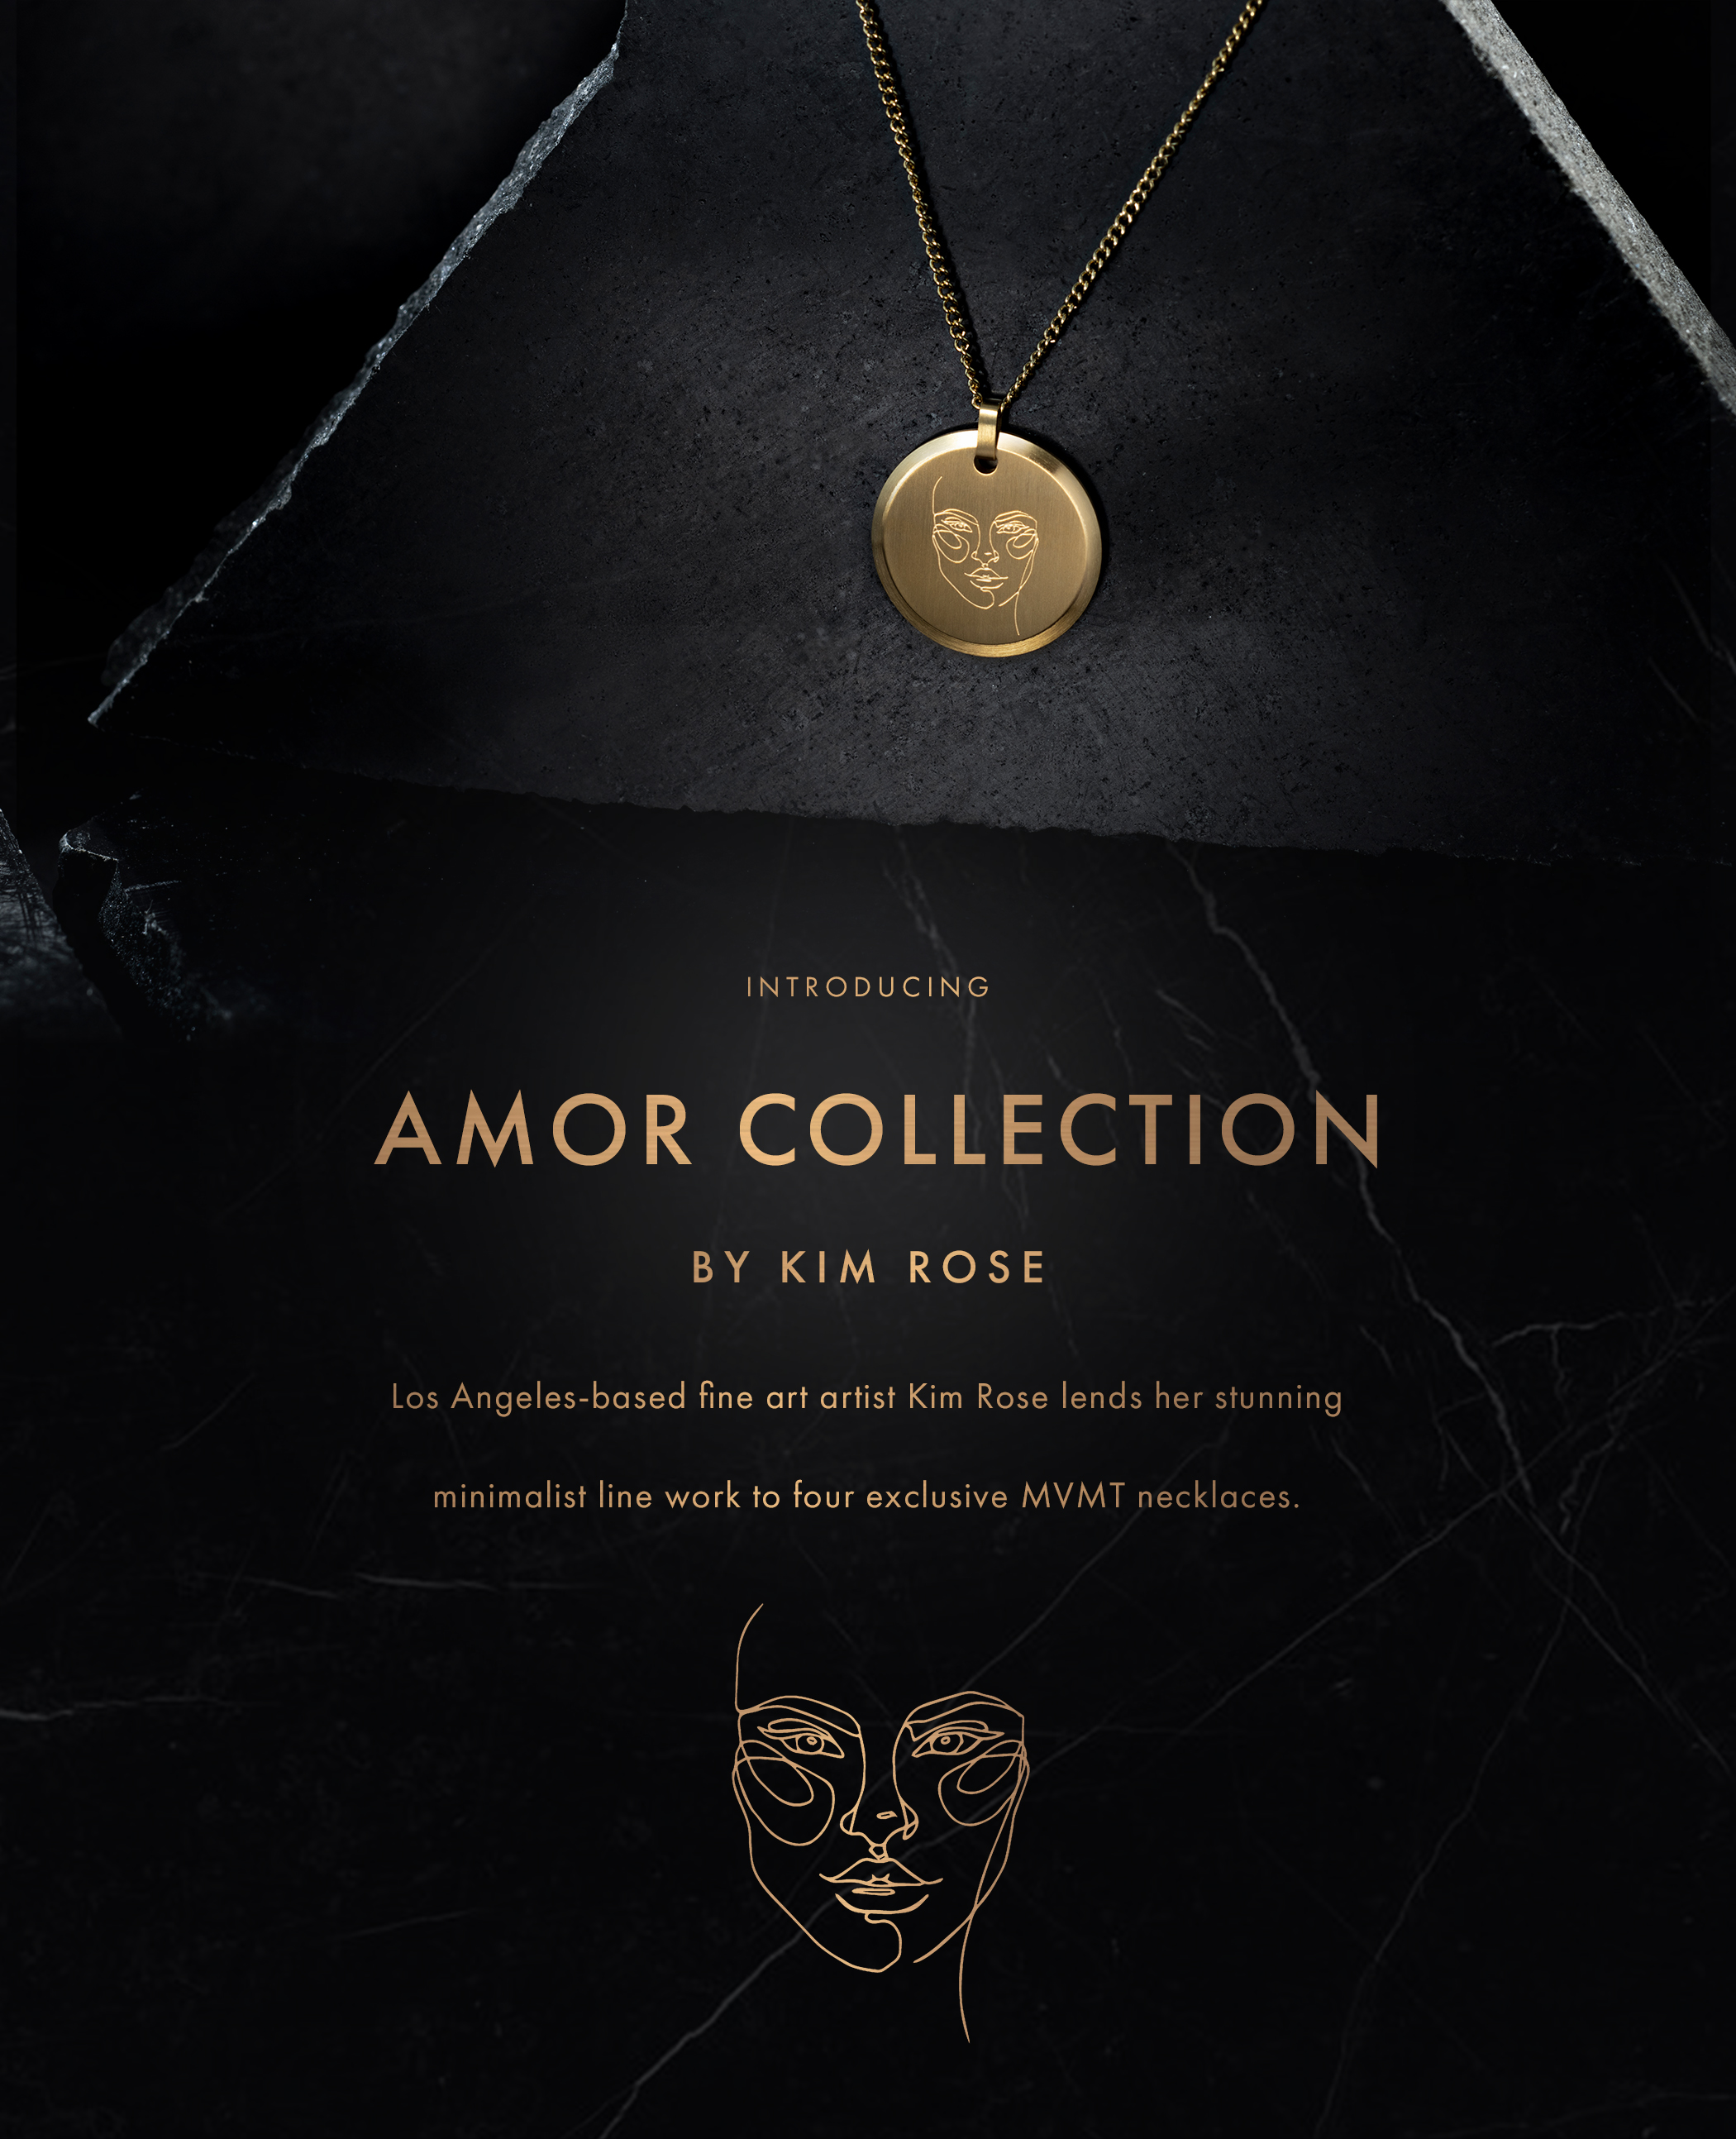 Introducing Amor Collection by Kim Rose. Los Angeles-based fine arts artist Kim Rose lends her stunning minimalist line work to four exclusive MVMT necklaces.